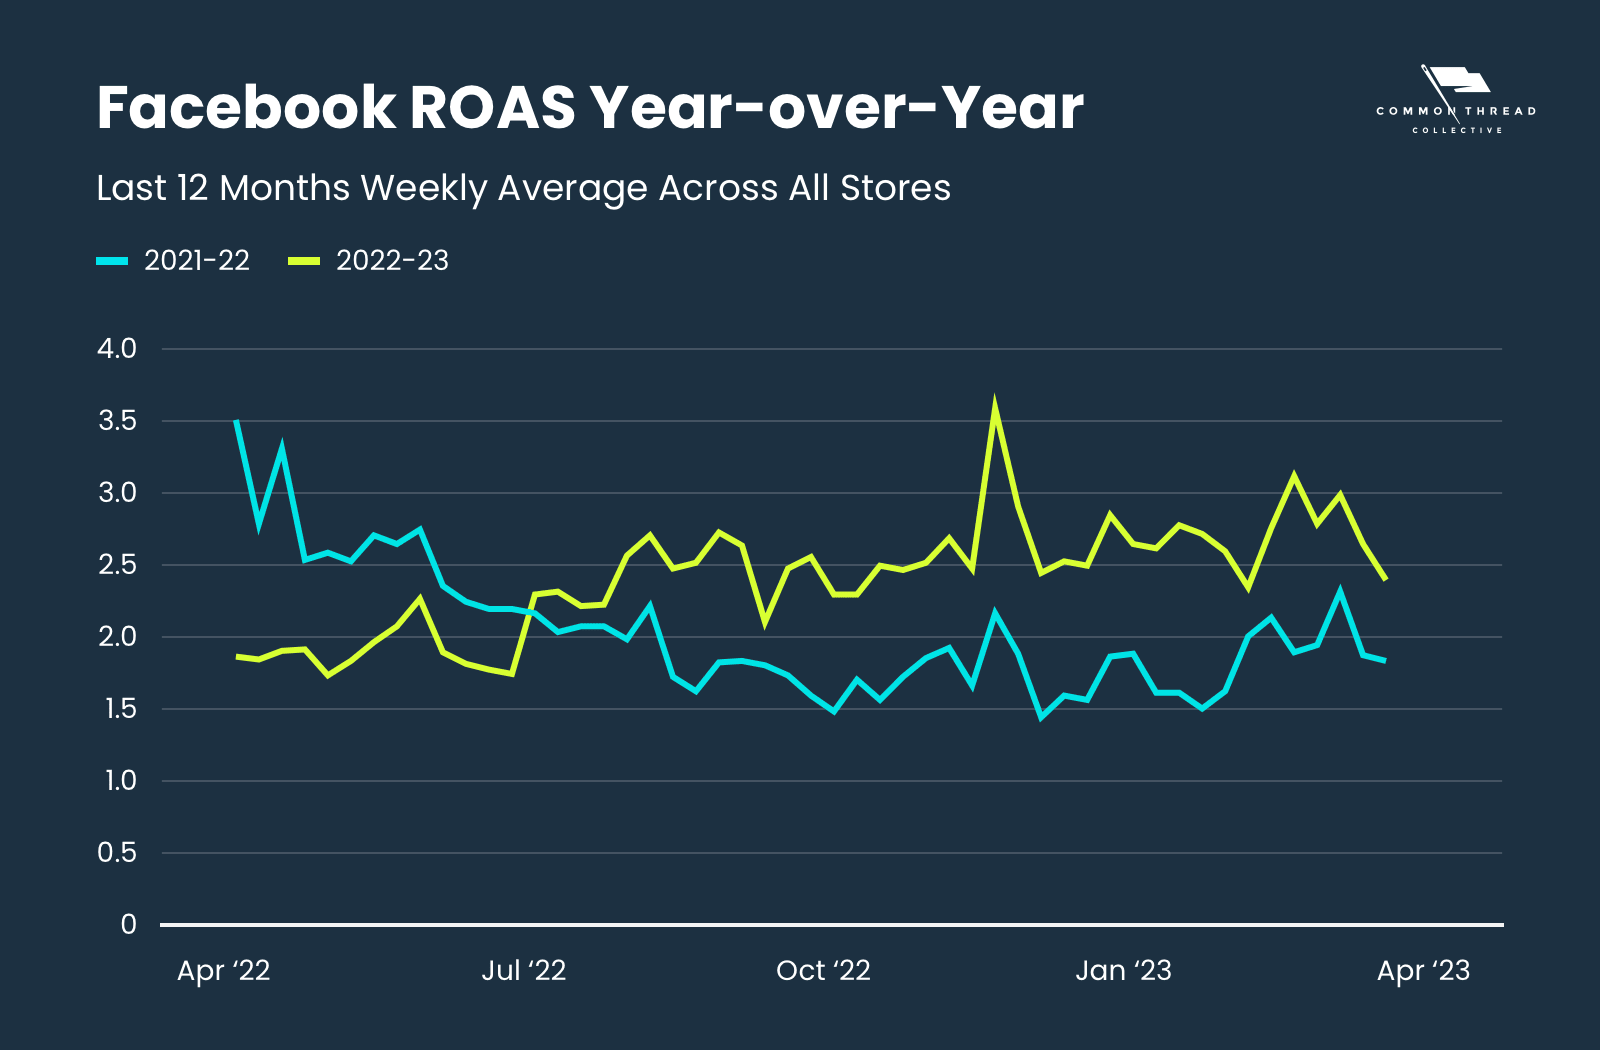 Facebook ROAS last 12 months year-over-year weekly average across all stores